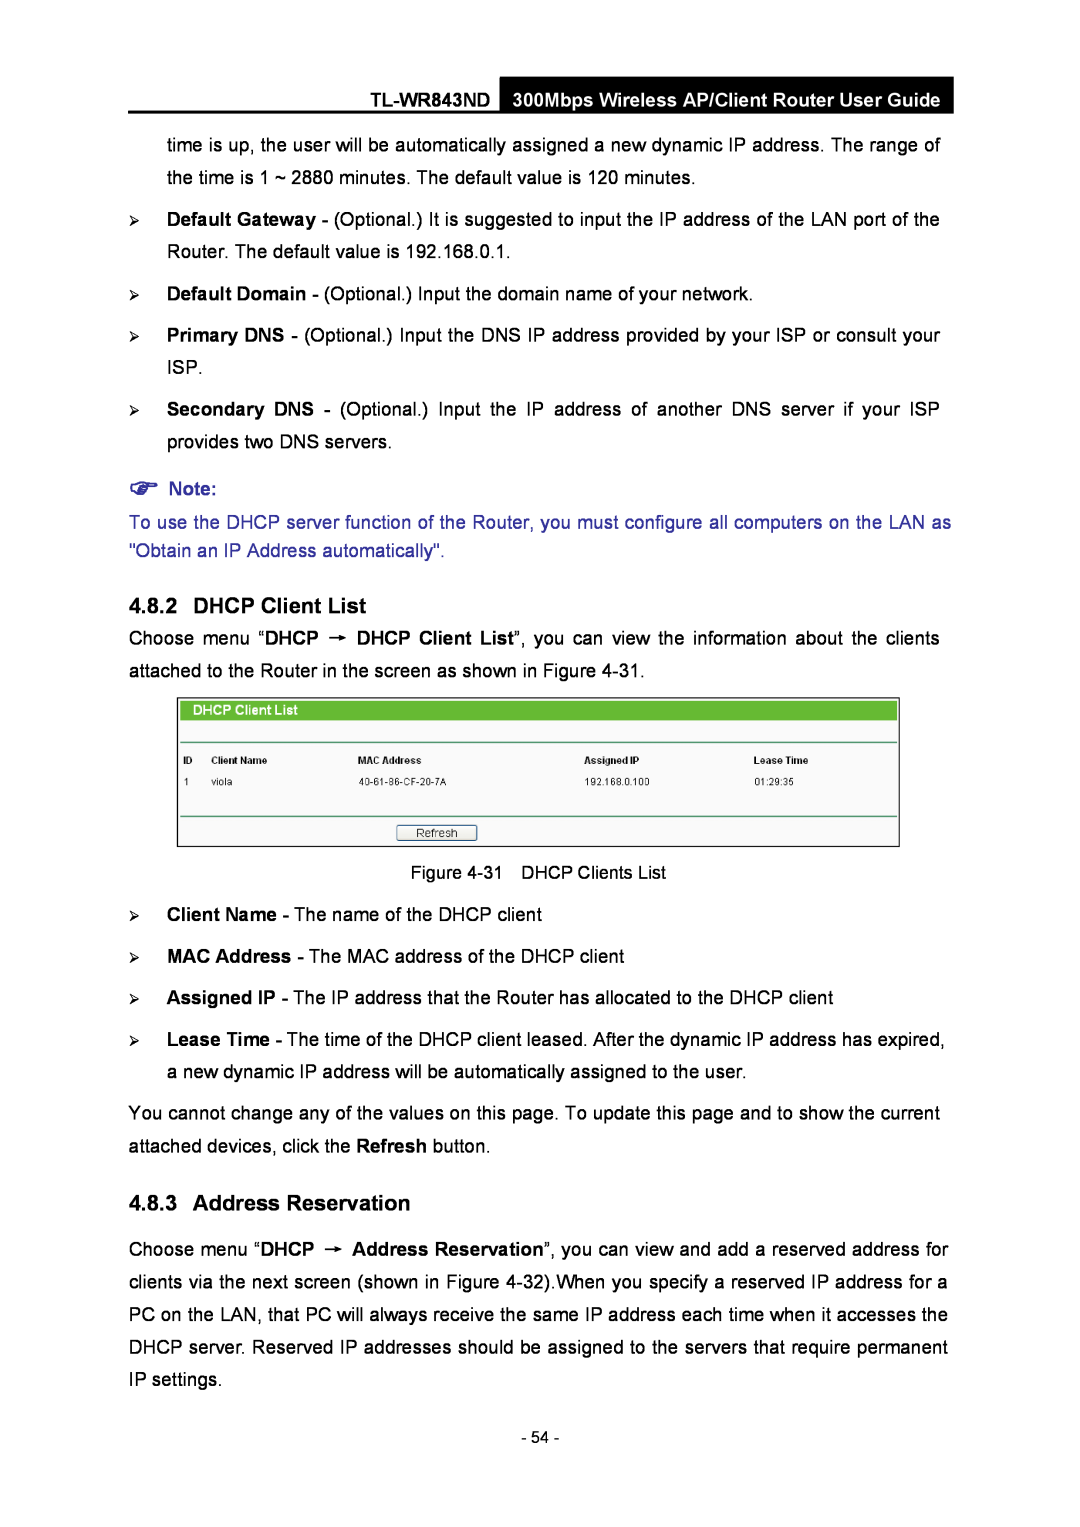 TP-Link manual DHCP Client List, Address Reservation, TL-WR843ND 300Mbps Wireless AP/Client Router User Guide,  Note 